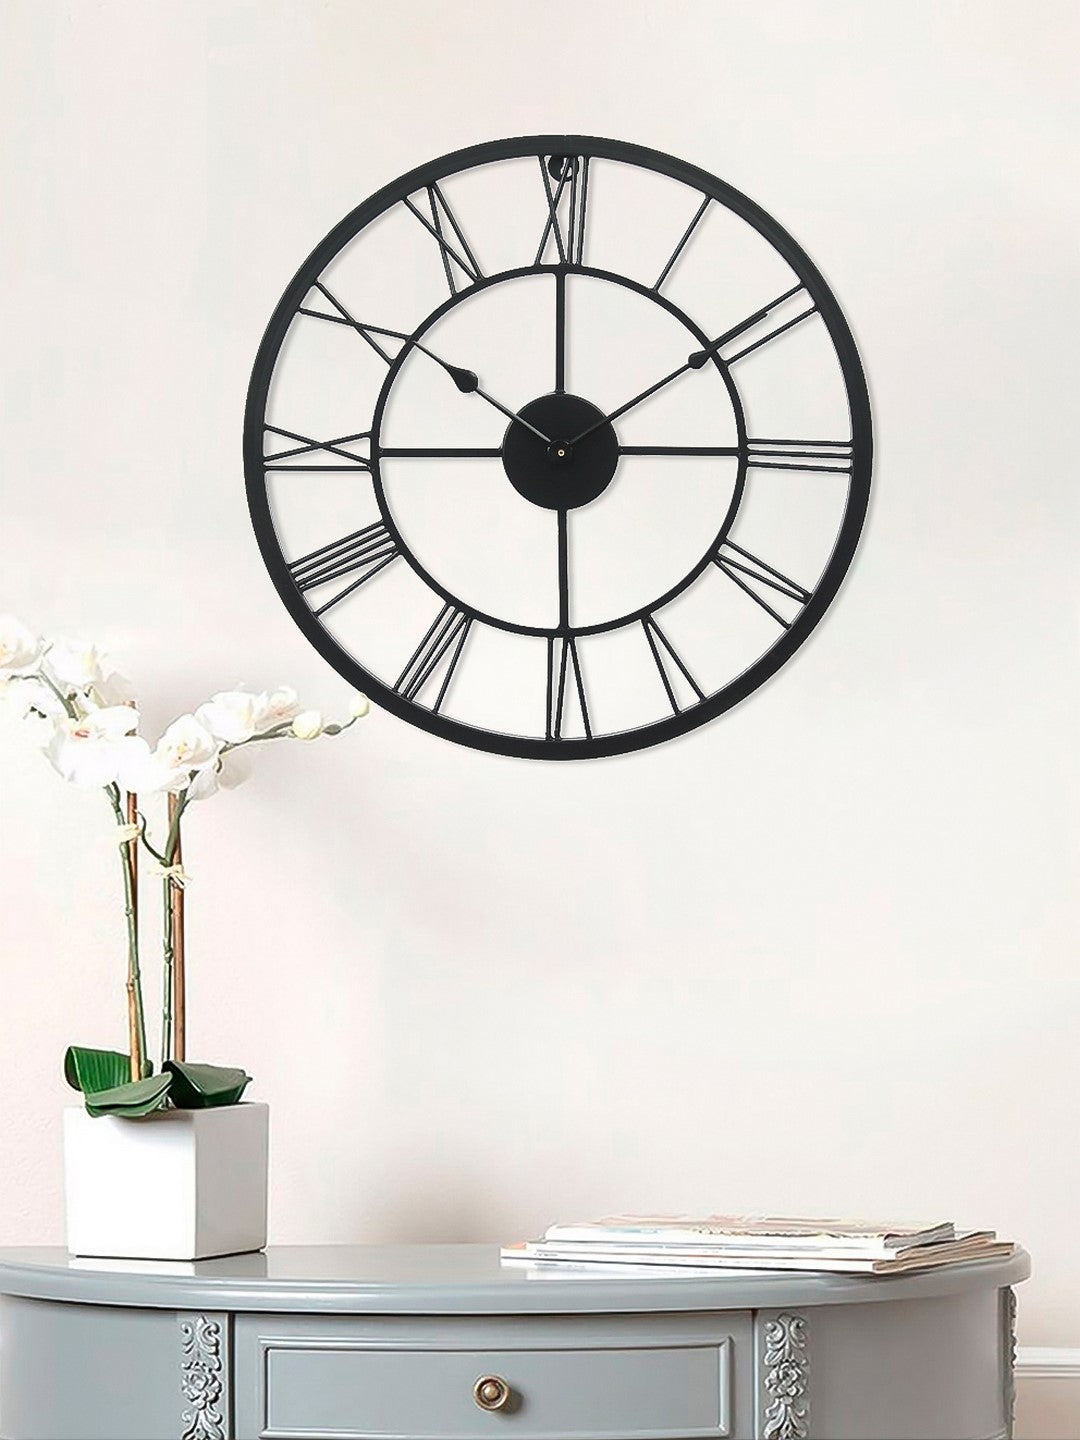 Black Iron Round Handcrafted Analog Roman Numeral Wall Clock Without Glass 2